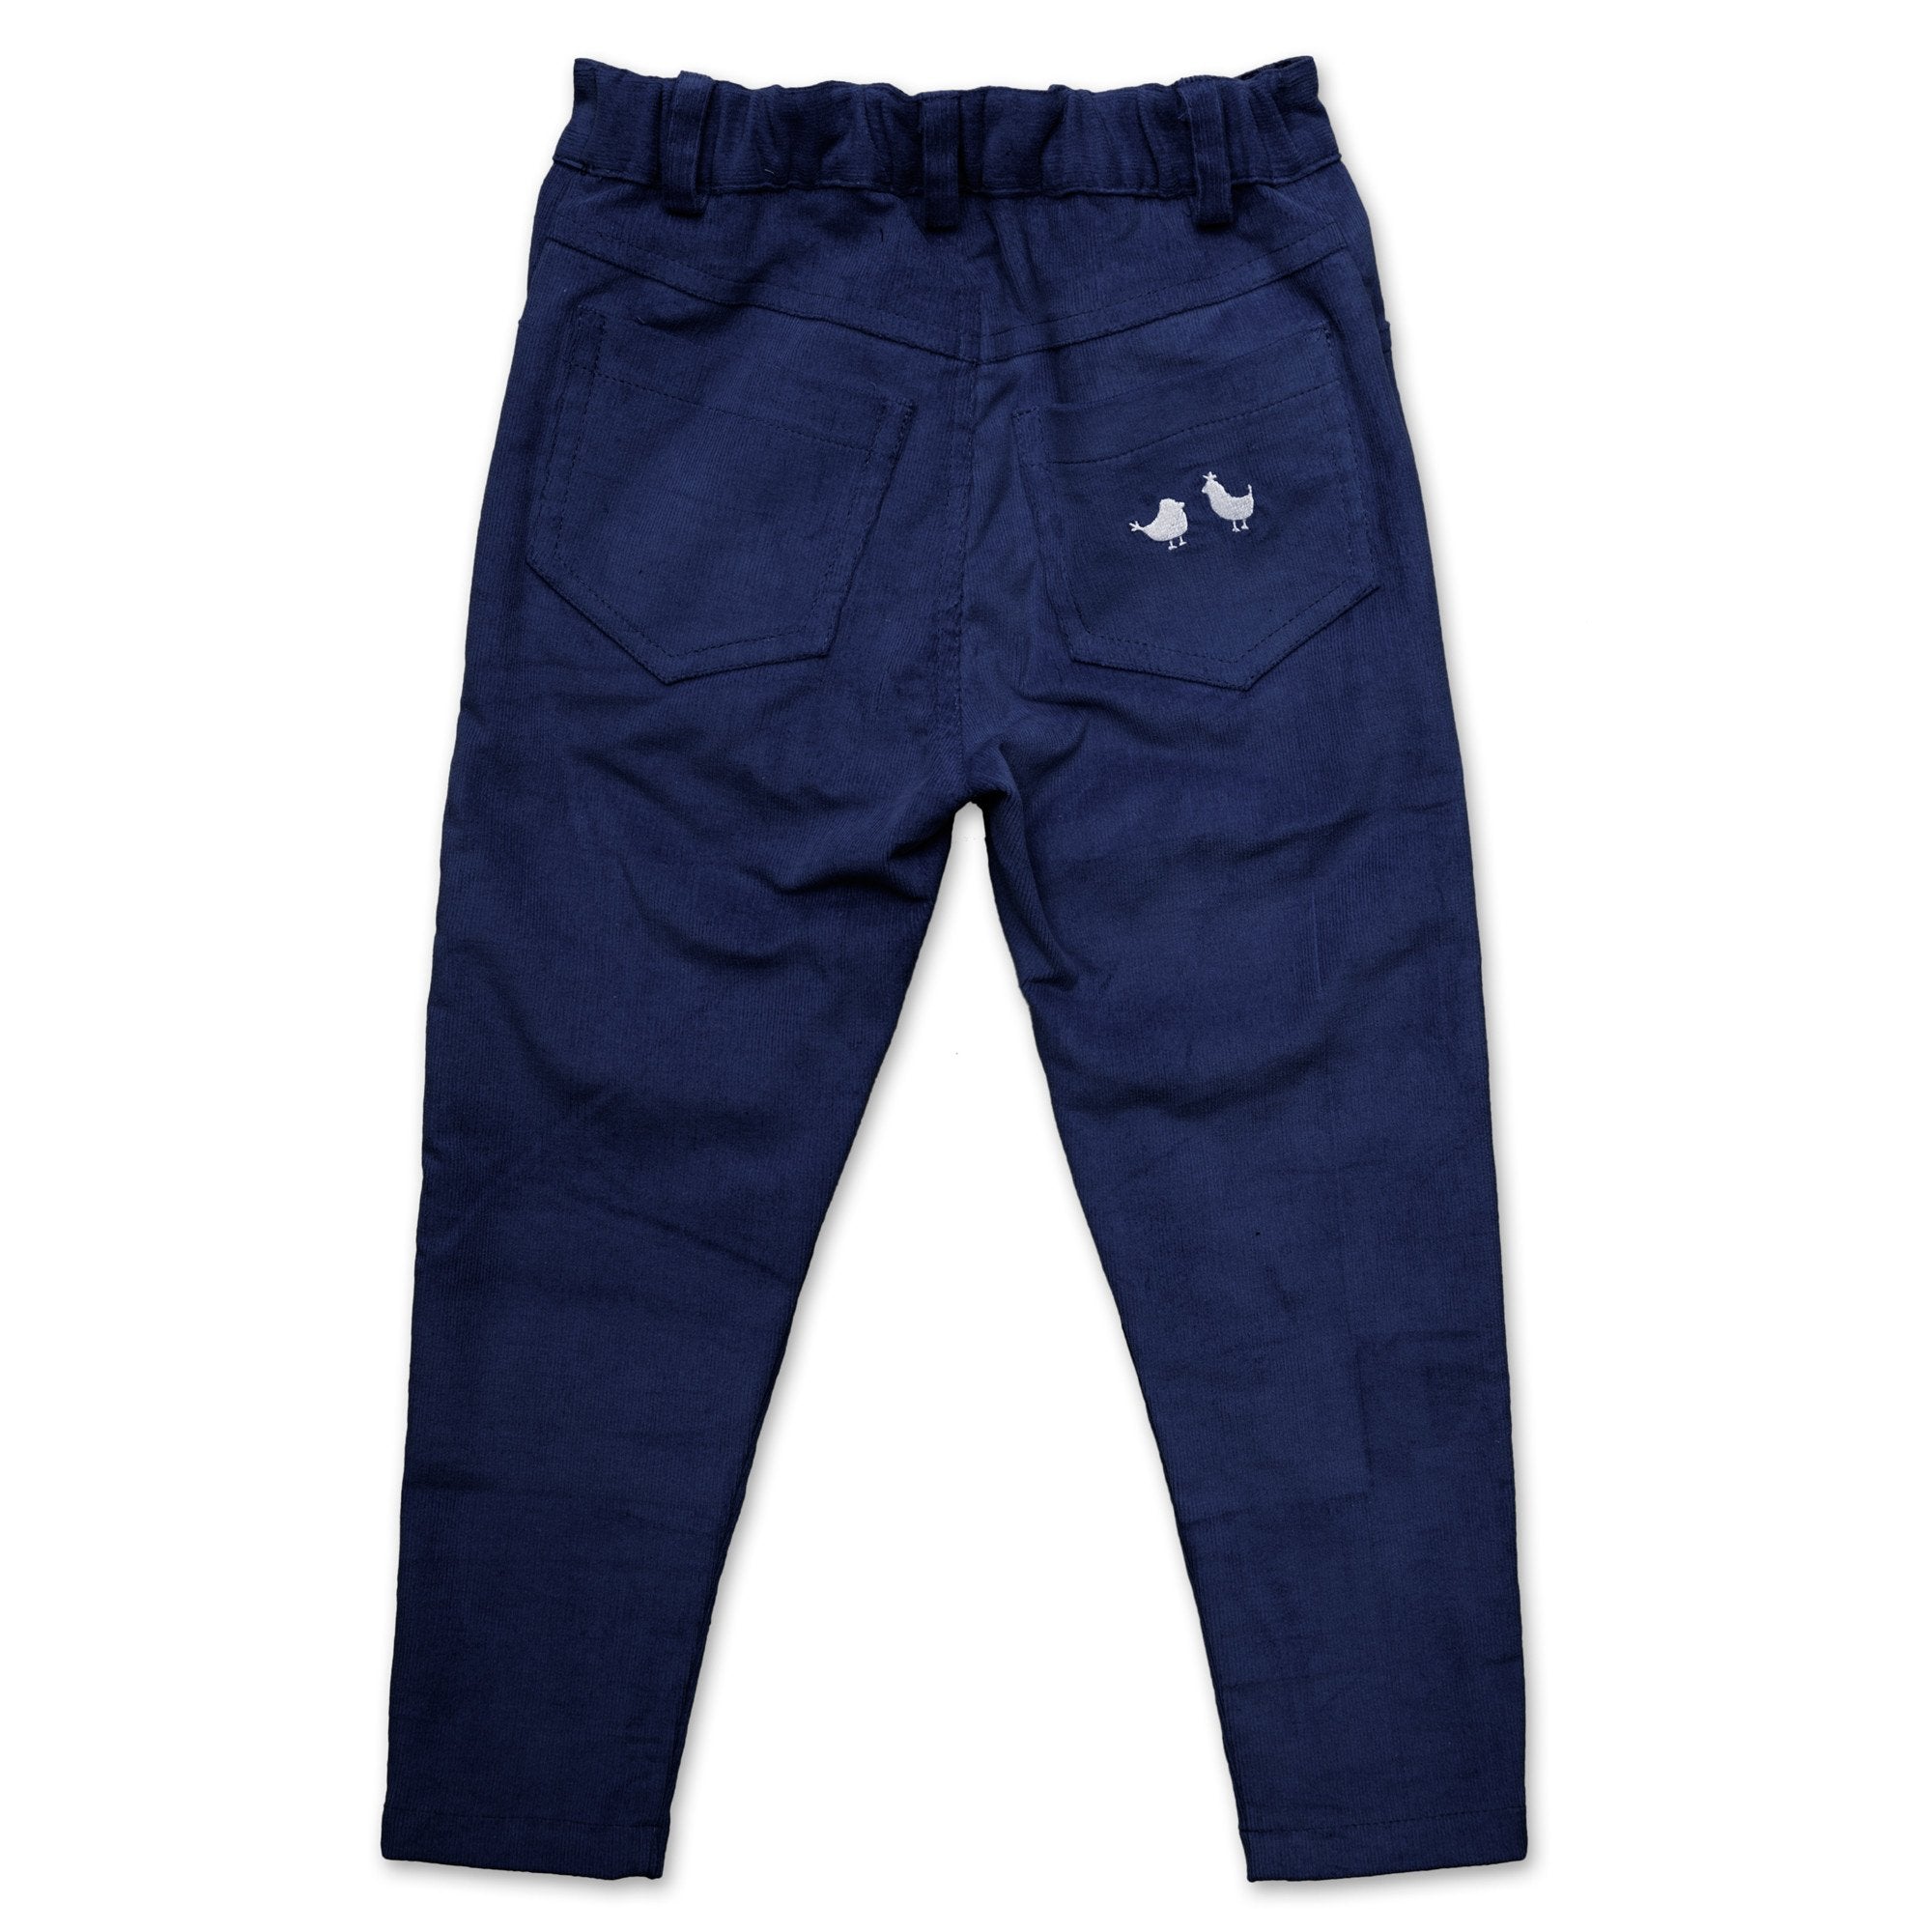 Corduroy Pants In Navy - Cou Cou Baby